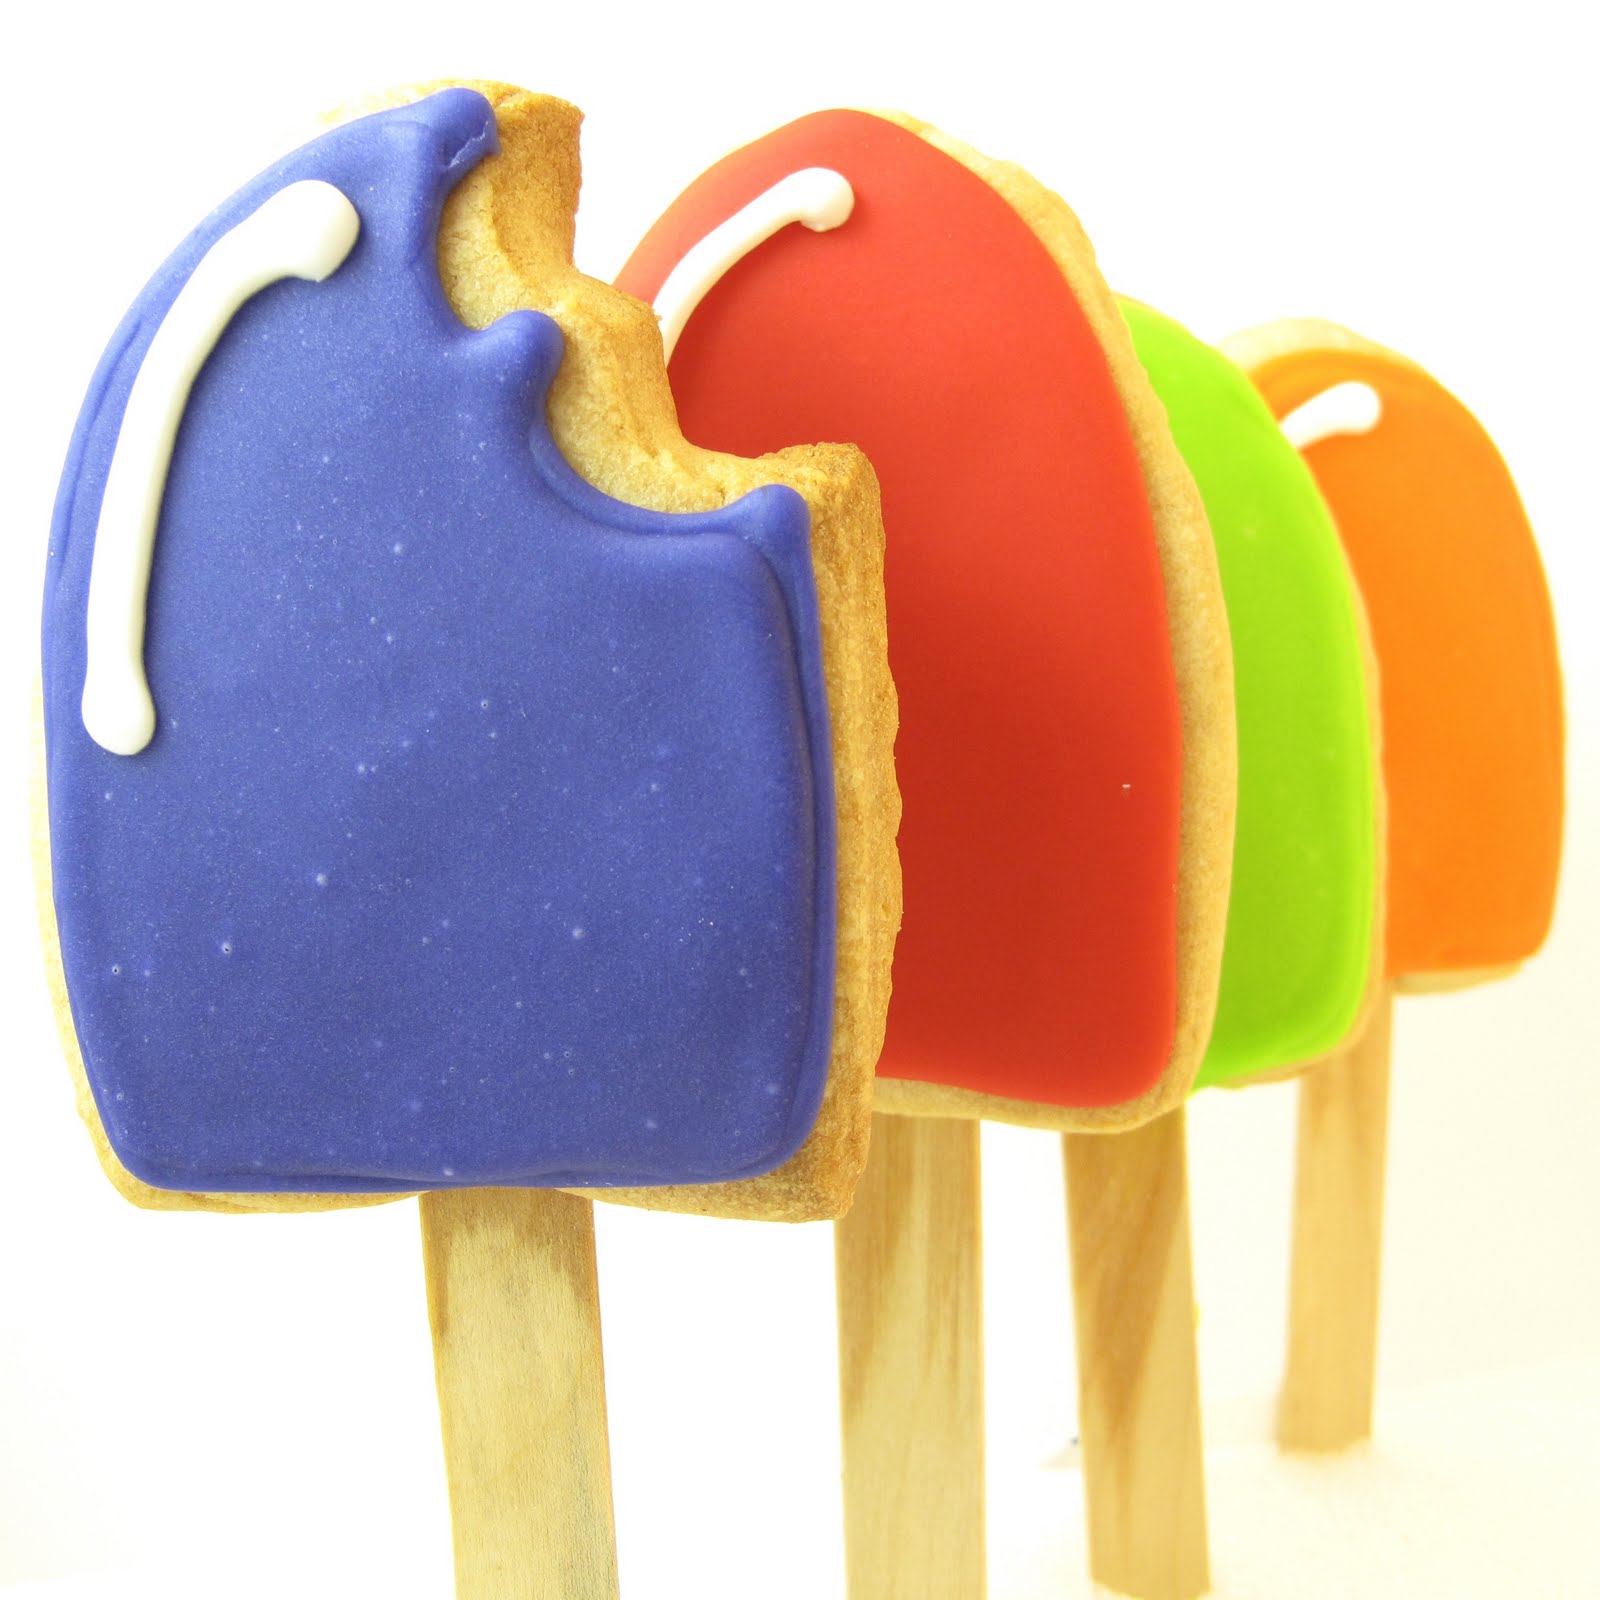 popsicles that never melt (because they are cookies) | The ...